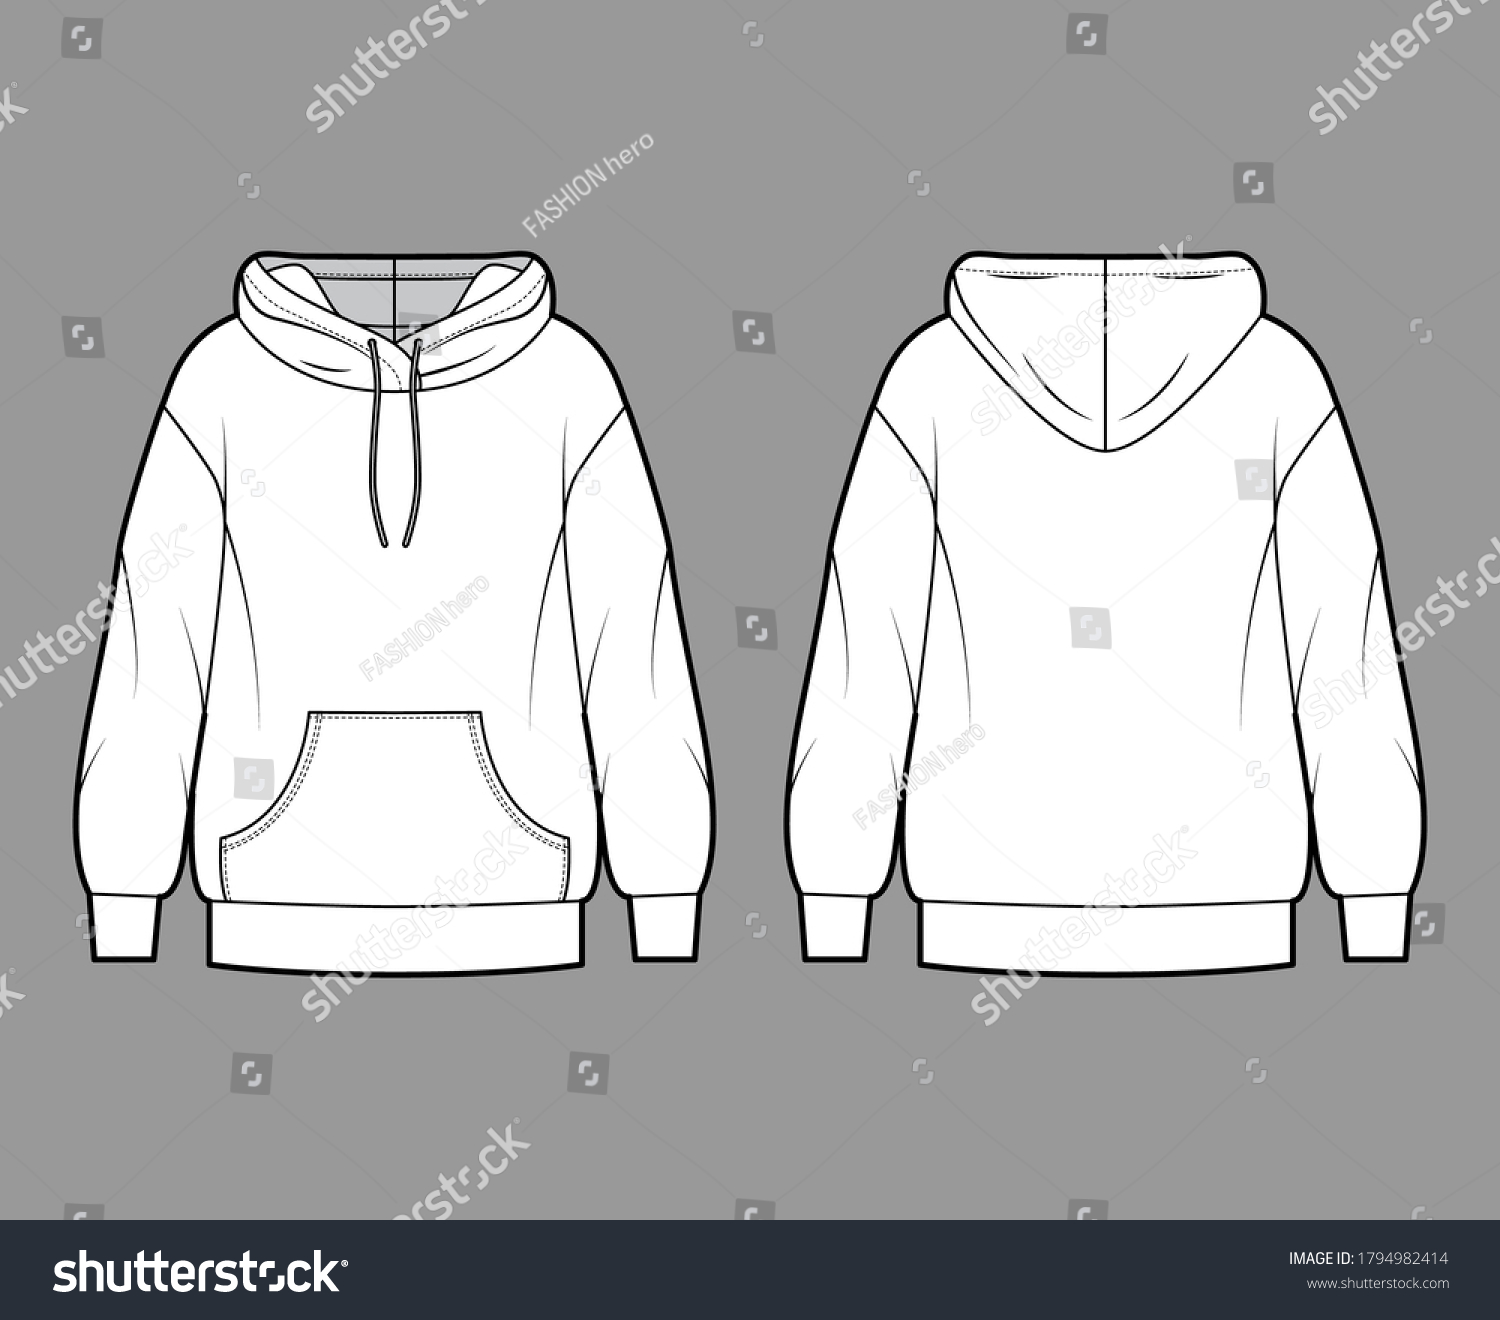 Oversized cotton-fleece hoodie technical fashion illustration with pocket, relaxed fit, long sleeves. Flat outwear jumper apparel template front back white color. Women, men, unisex sweatshirt top CAD #1794982414